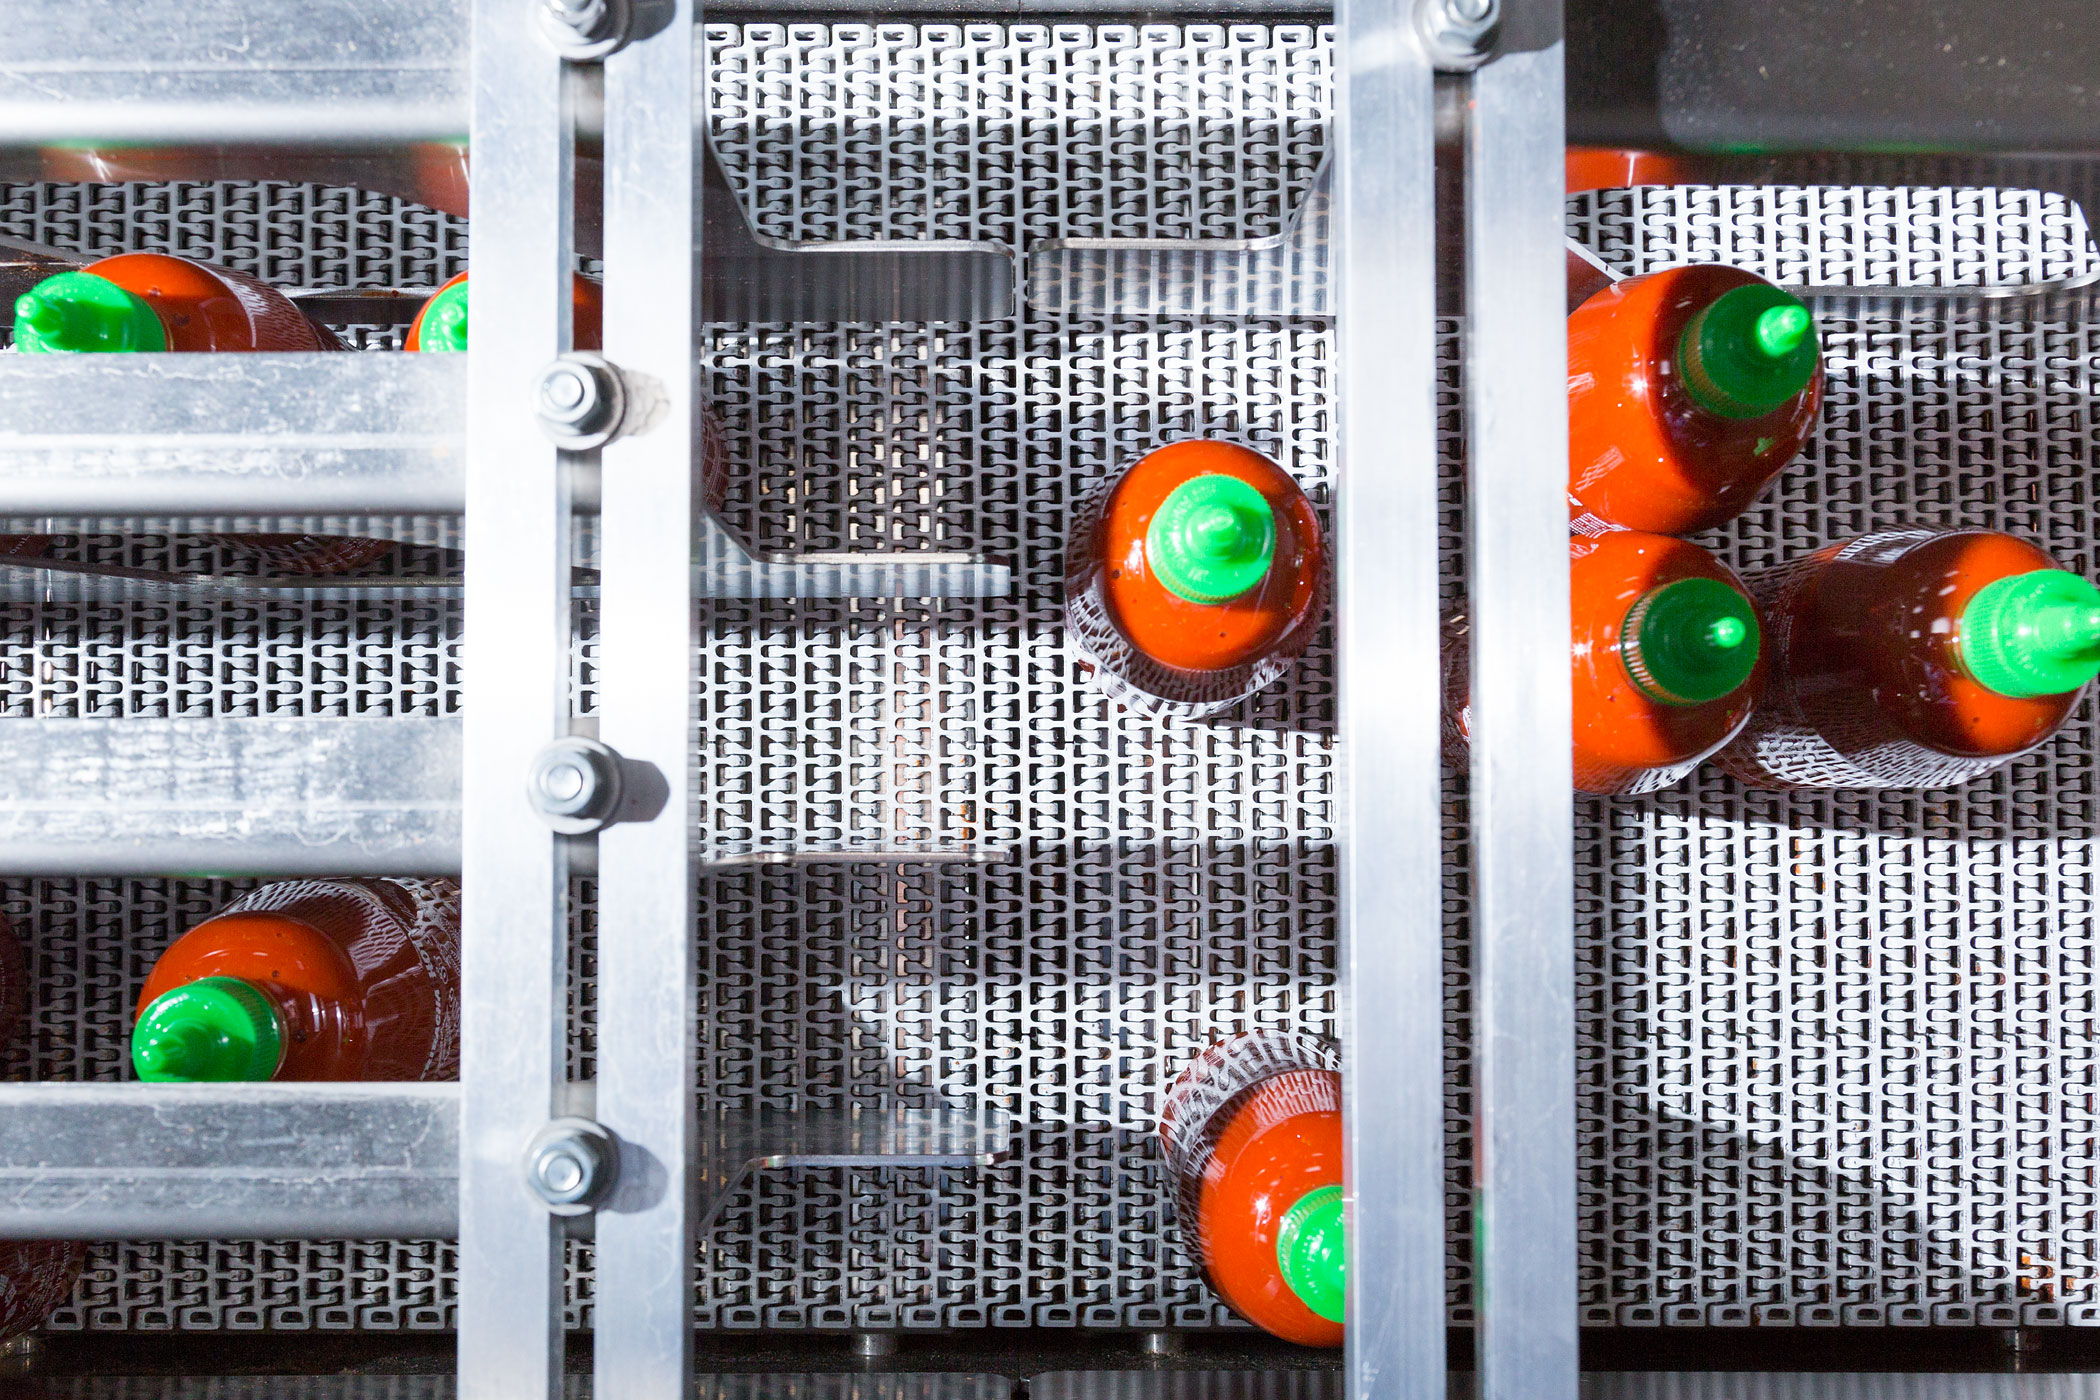 Filled and capped bottles of Sriracha come off the assembly line and are organized for boxing.